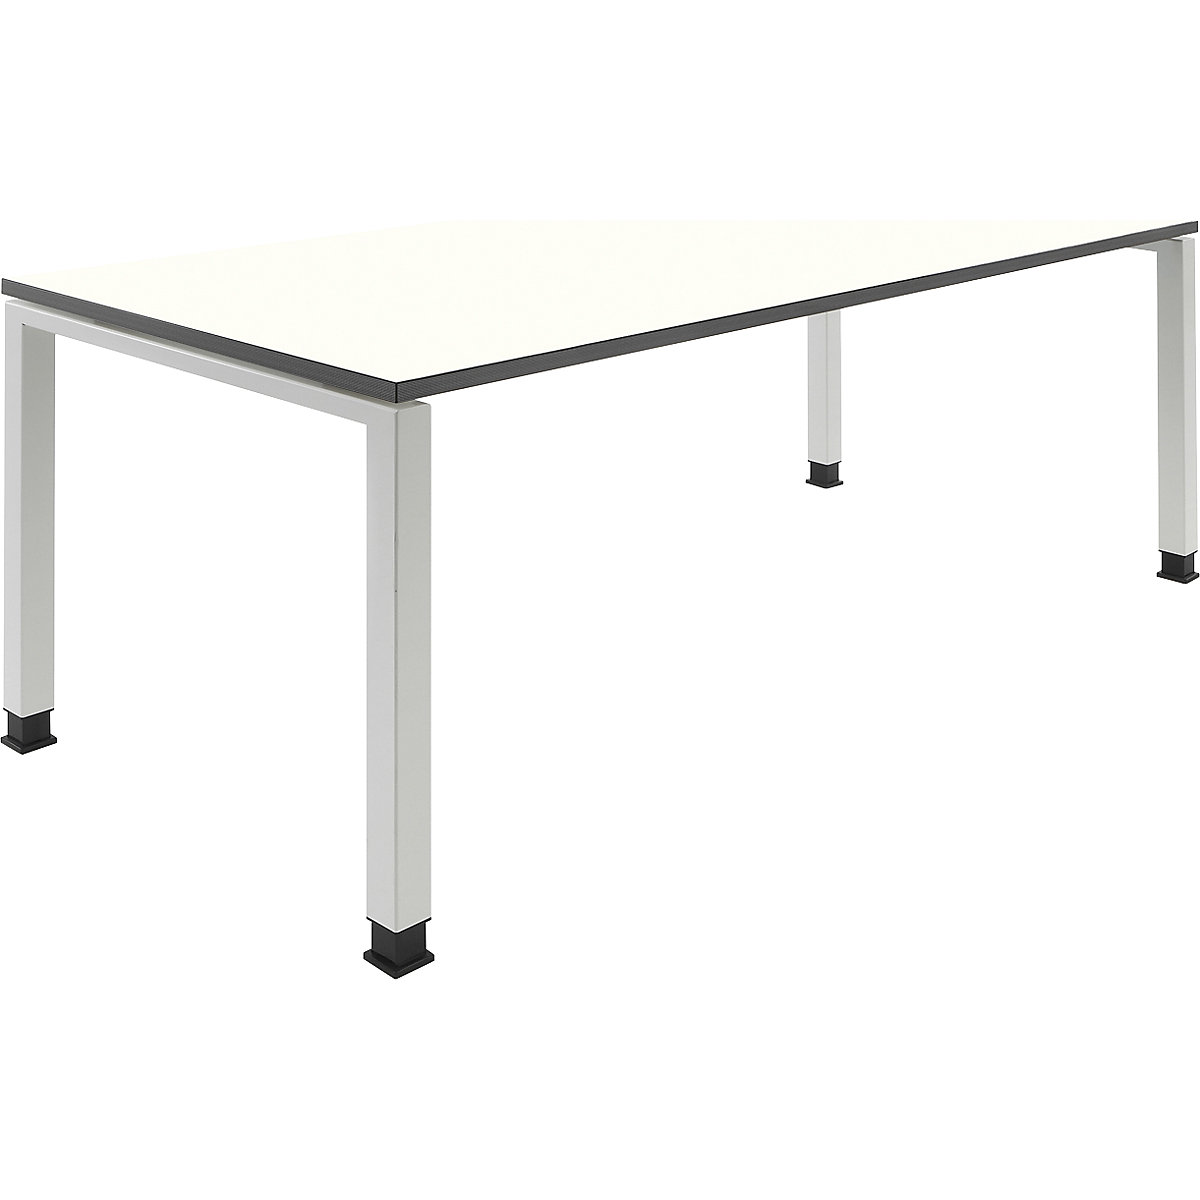 mauser – ARCOS desk, WxD 1800 x 800 mm, pure white tabletop